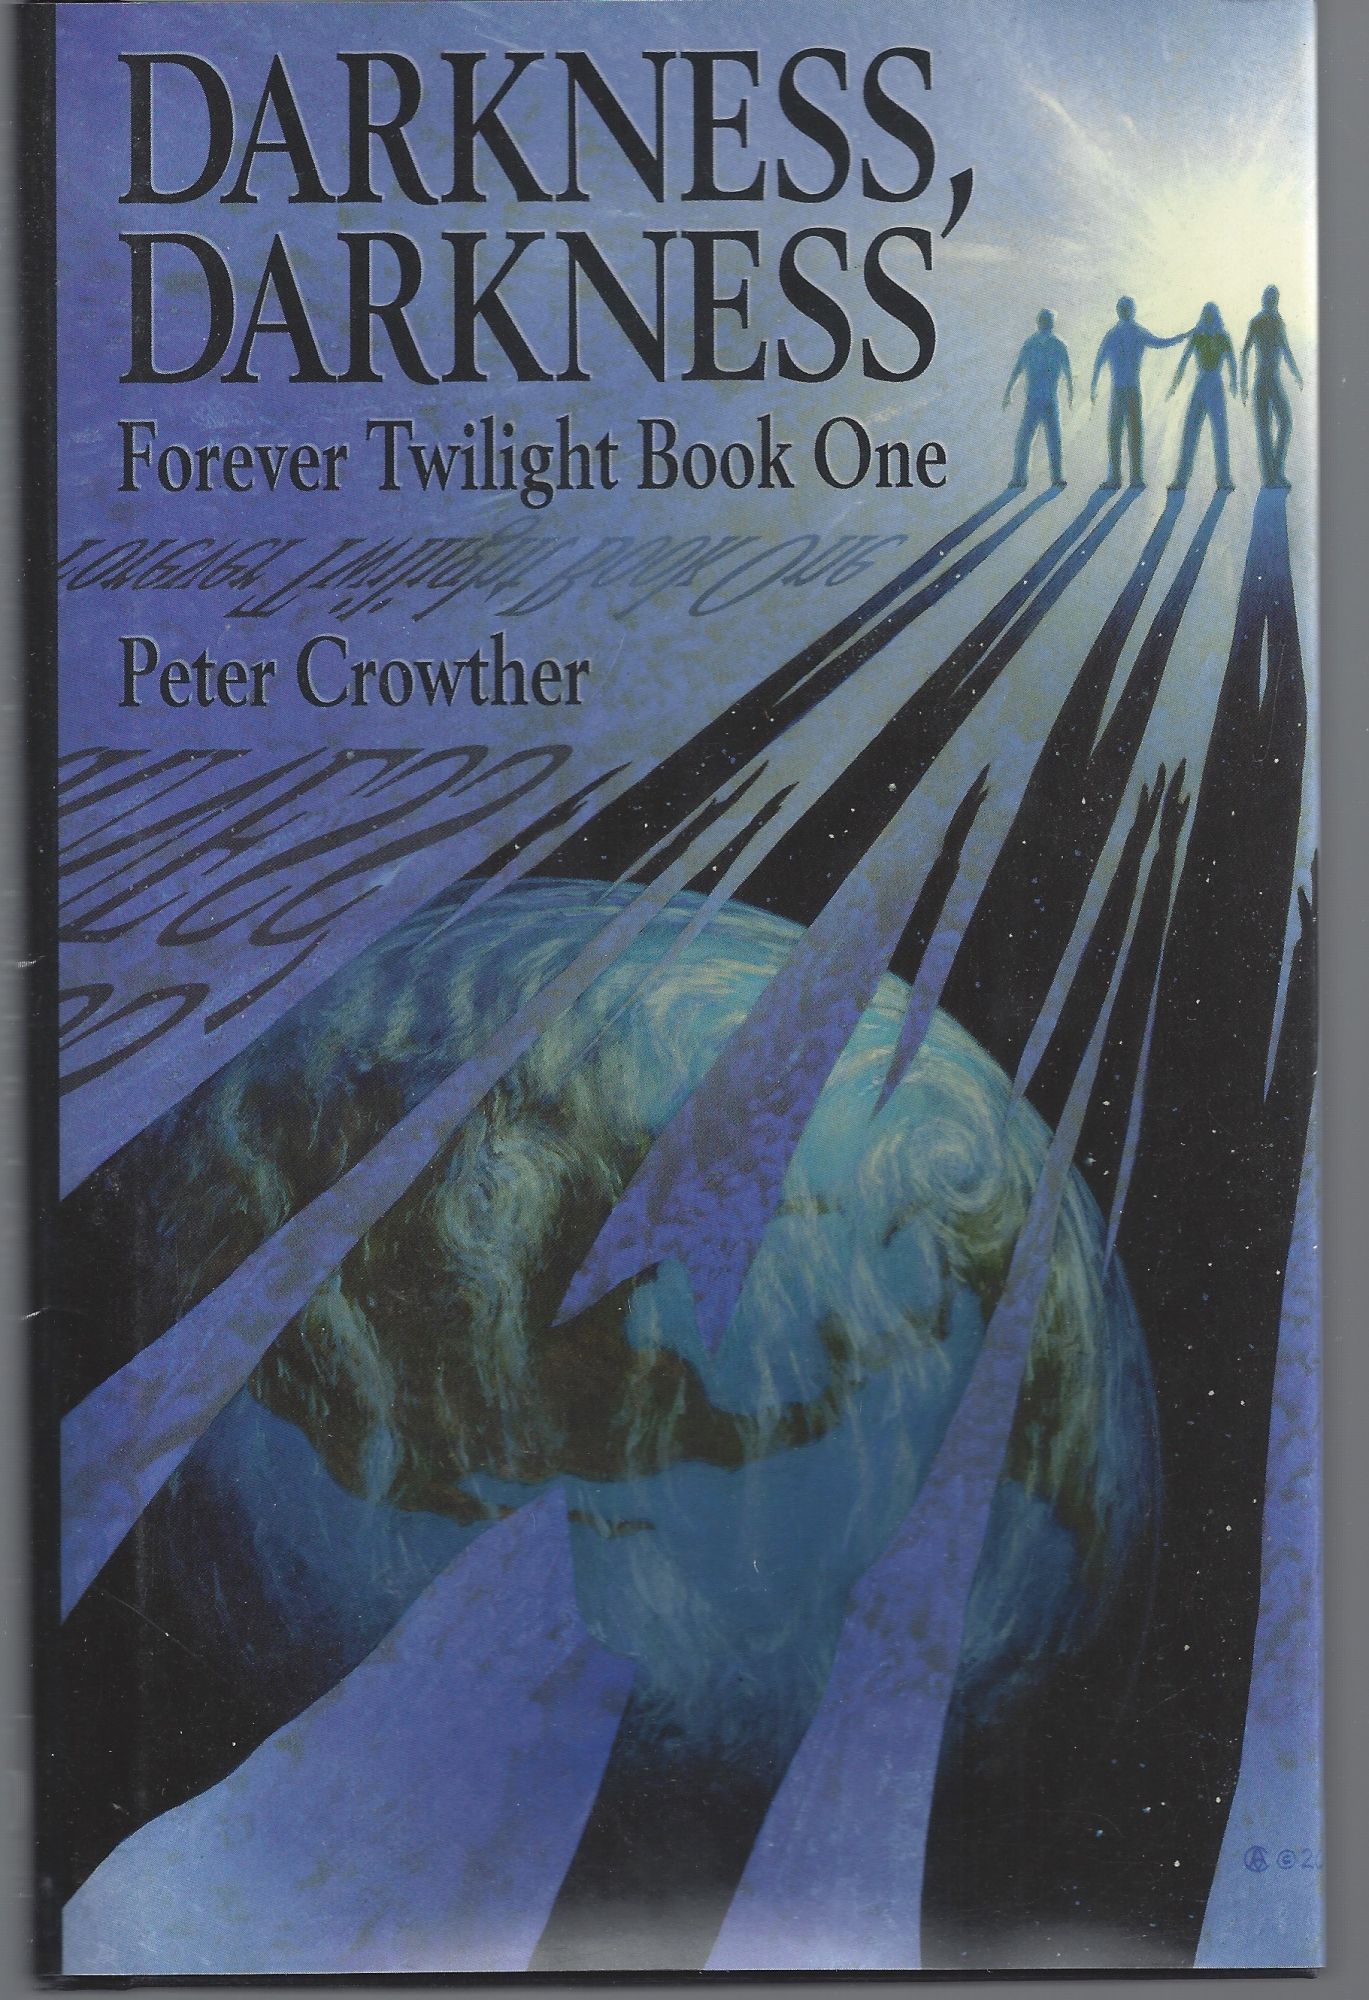 Darkness, Darkness (Forever Twilight Book One) - Crowther, Peter